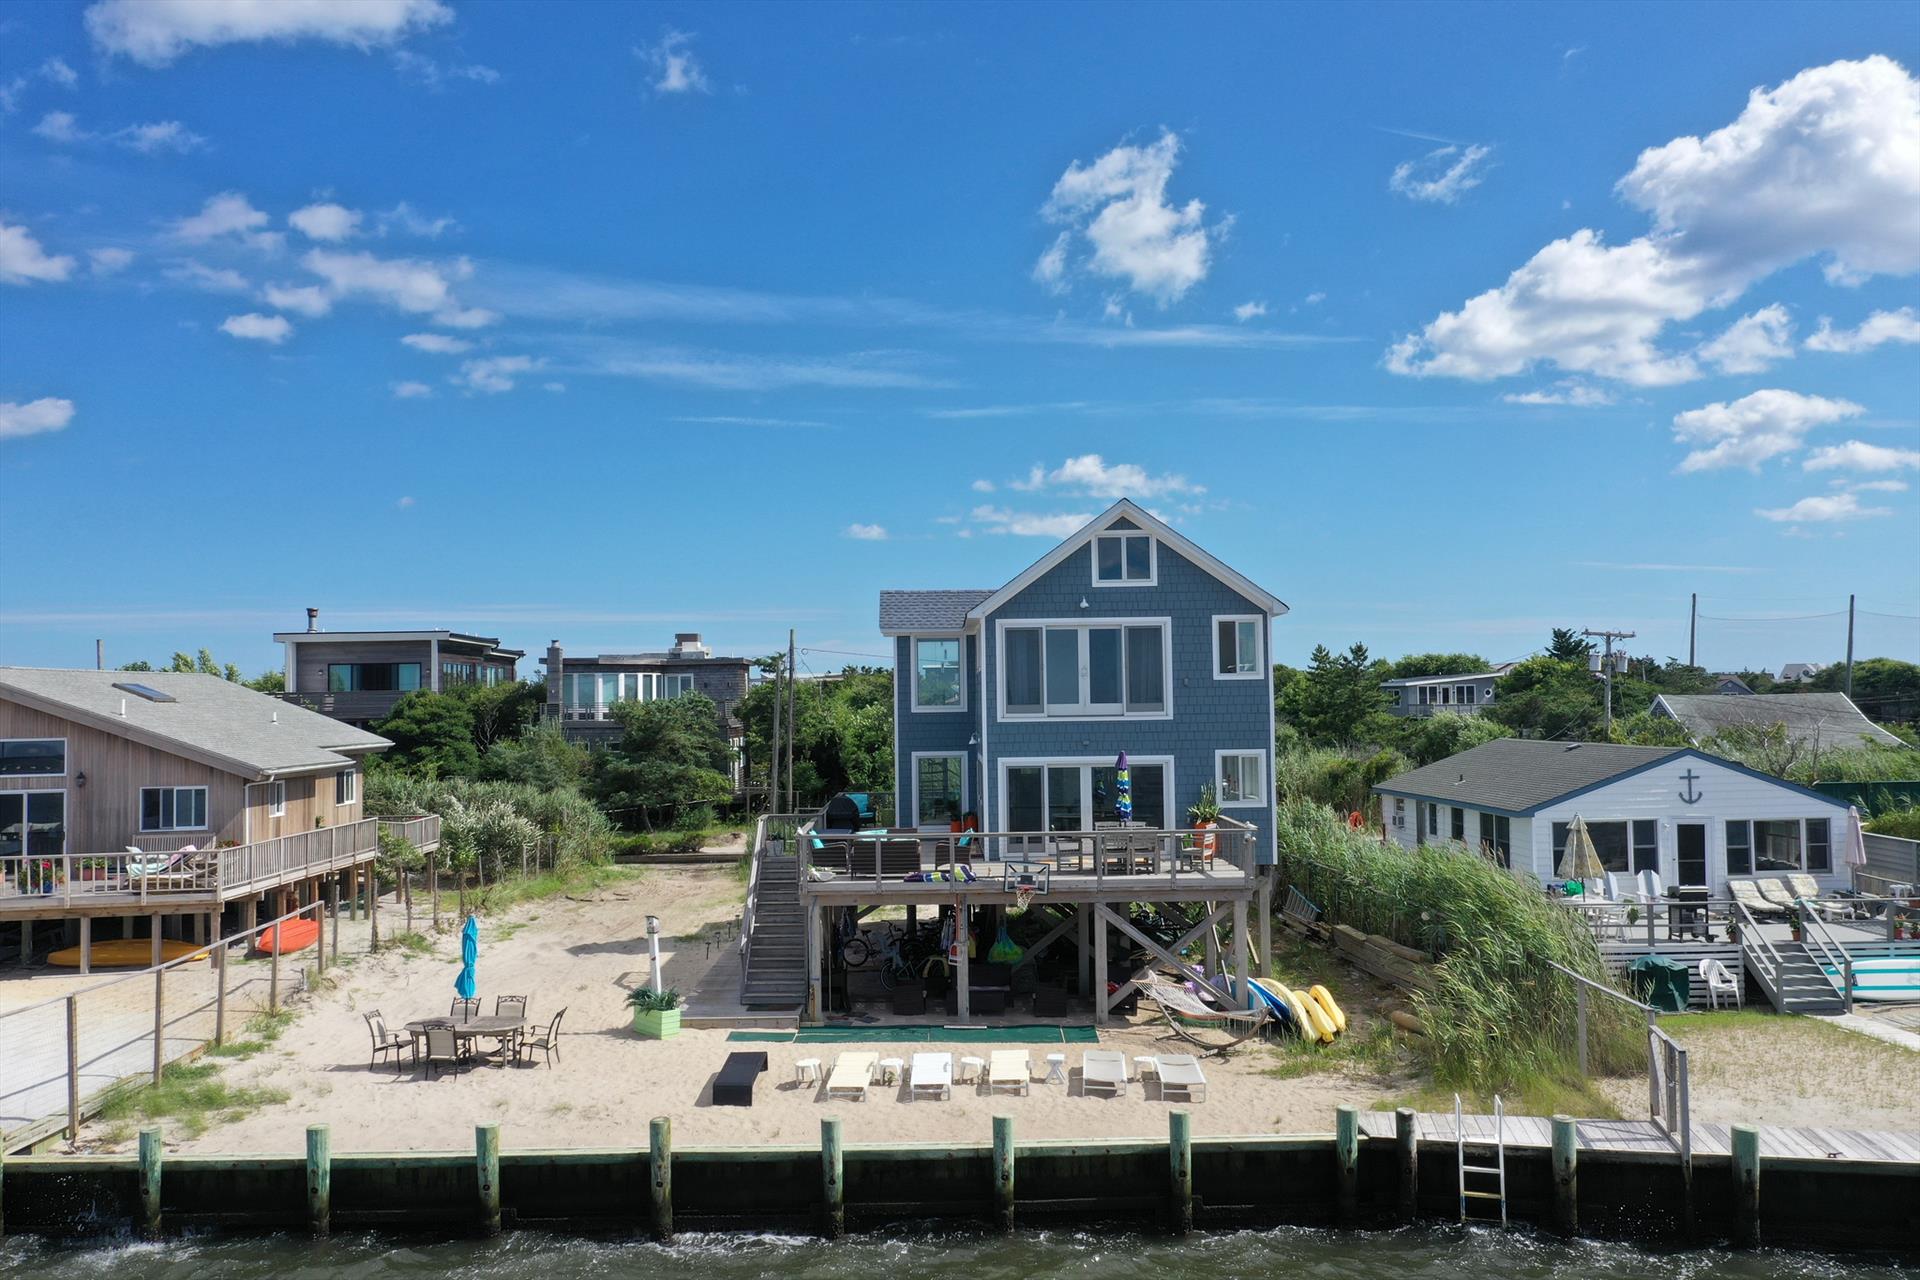 Located right on the Bay in Ocean Bay Park, this house was completely renovated in 2023 from top to bottom, inside & out! This home provides all you need to enjoy your stay on Fire Island!  Spacious deck allows for plenty of outdoor entertaining, dining and sunbathing with epic bay views.  You can easily spend the whole day here with your own private beach area below complete with outdoor shower, chaises, kayaks and more! Stay cool & comfortable with ductless AC throughout. 
<br>
